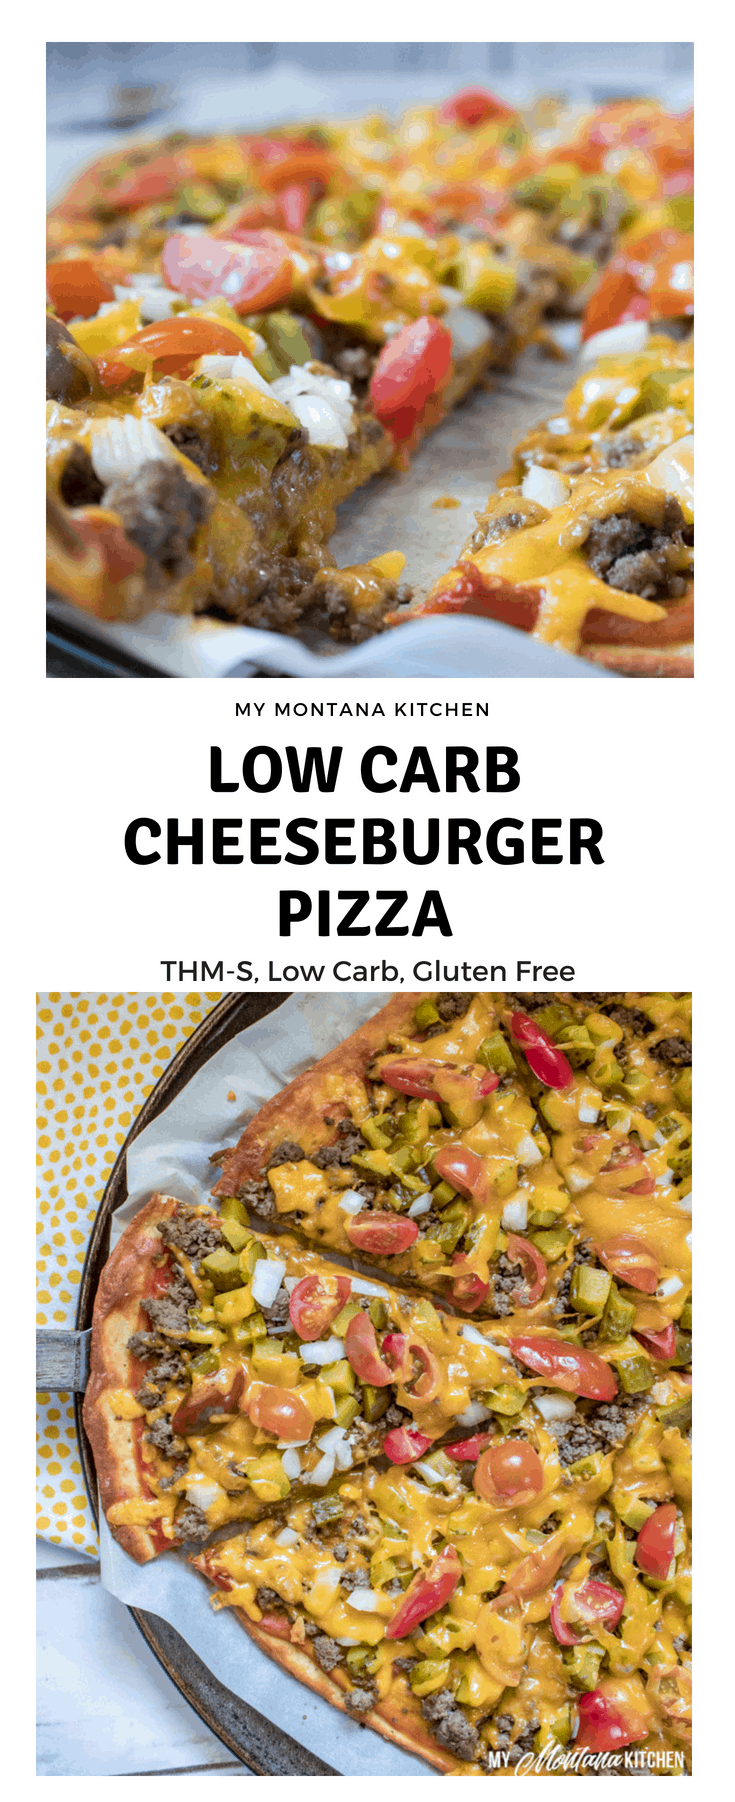 Combine the best of both cheeseburgers and pizza and you have a delicious and easy dinner idea - Cheeseburger Pizza! Using a low carb crust and lots of toppings, this keto pizza is perfect for a family dinner! #trimhealthymama #thm #lowcarb #keto #cheeseburger #pizza #groundbeef #easyrecipe #glutenfree